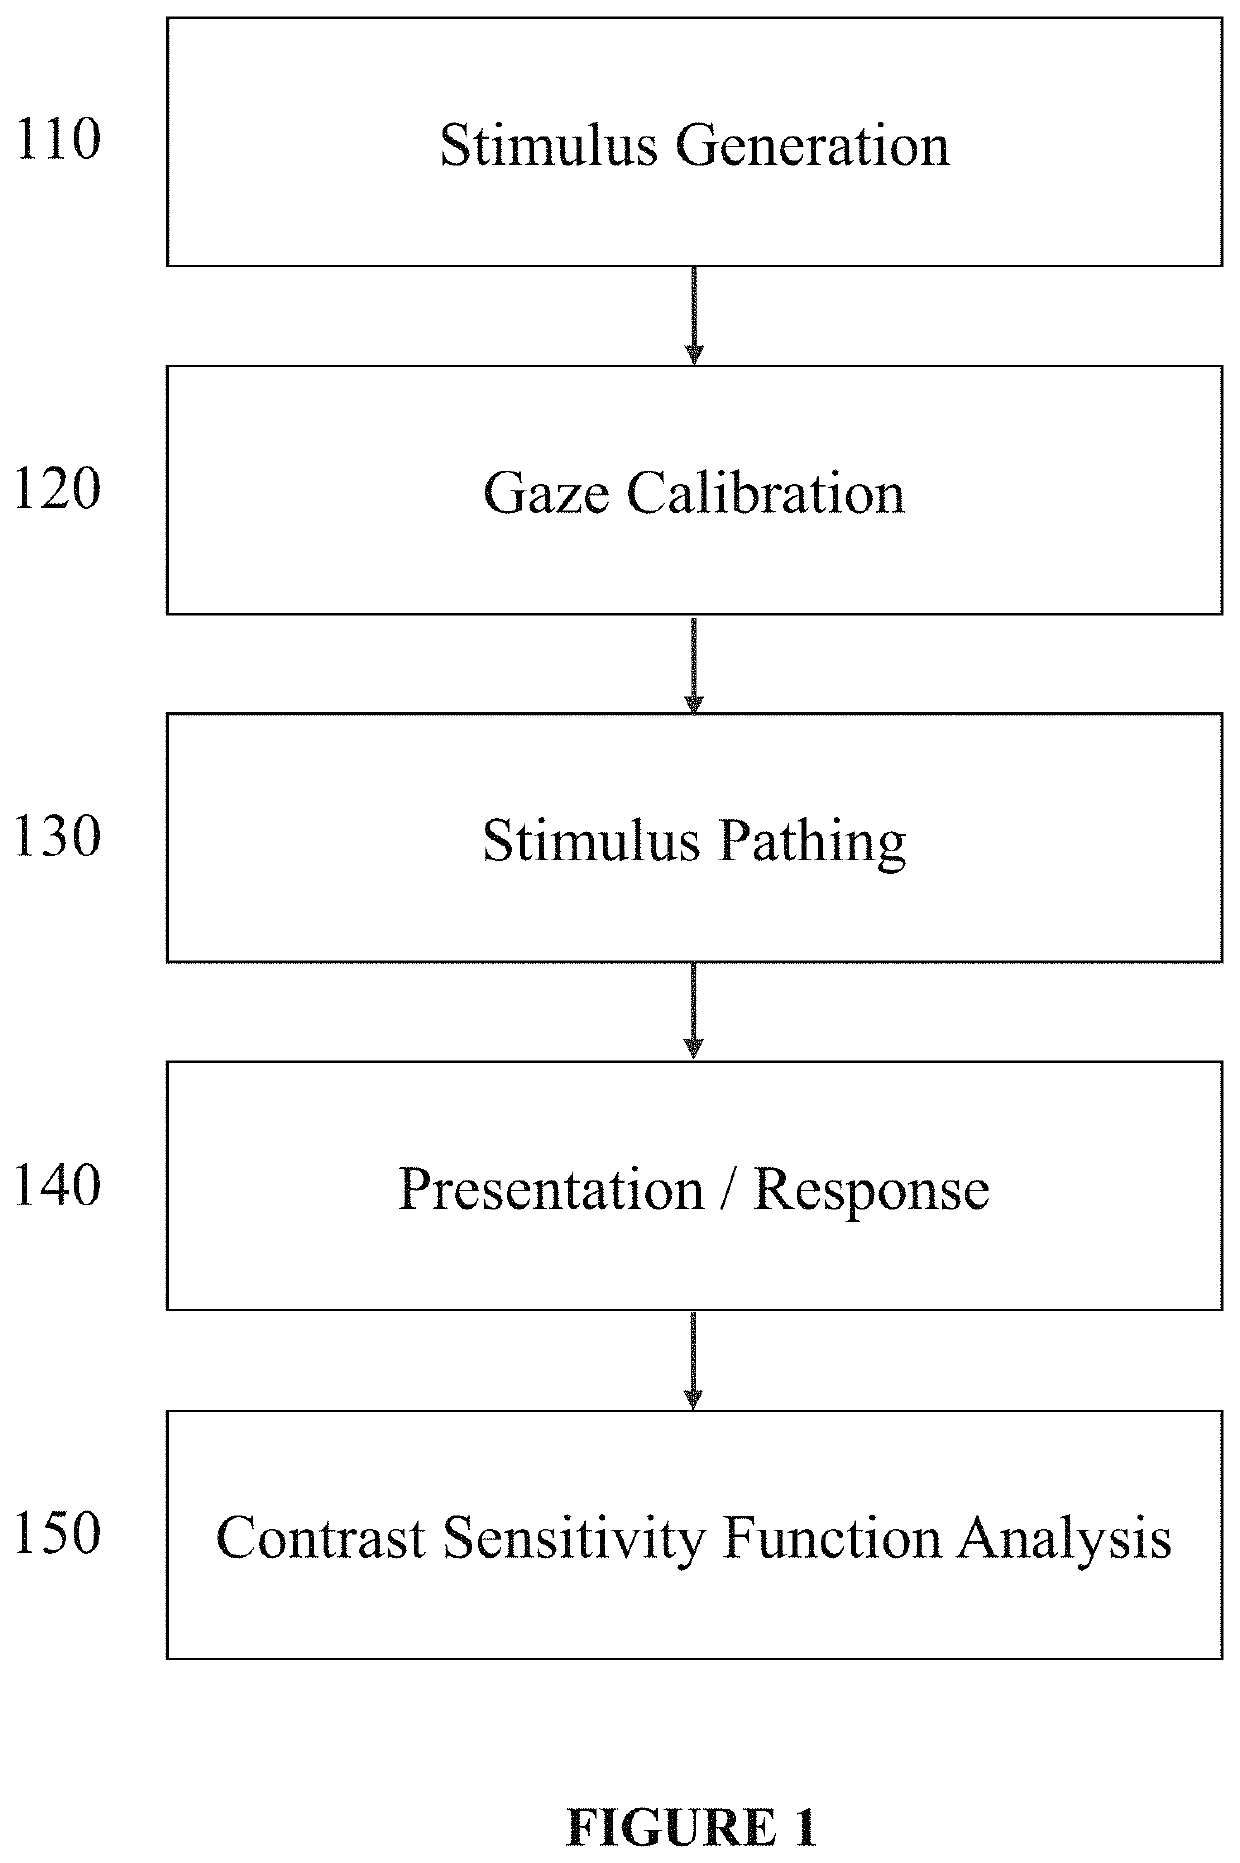 Systems and Methods for Evaluating Contrast Sensitivity and Other Visual Metrics